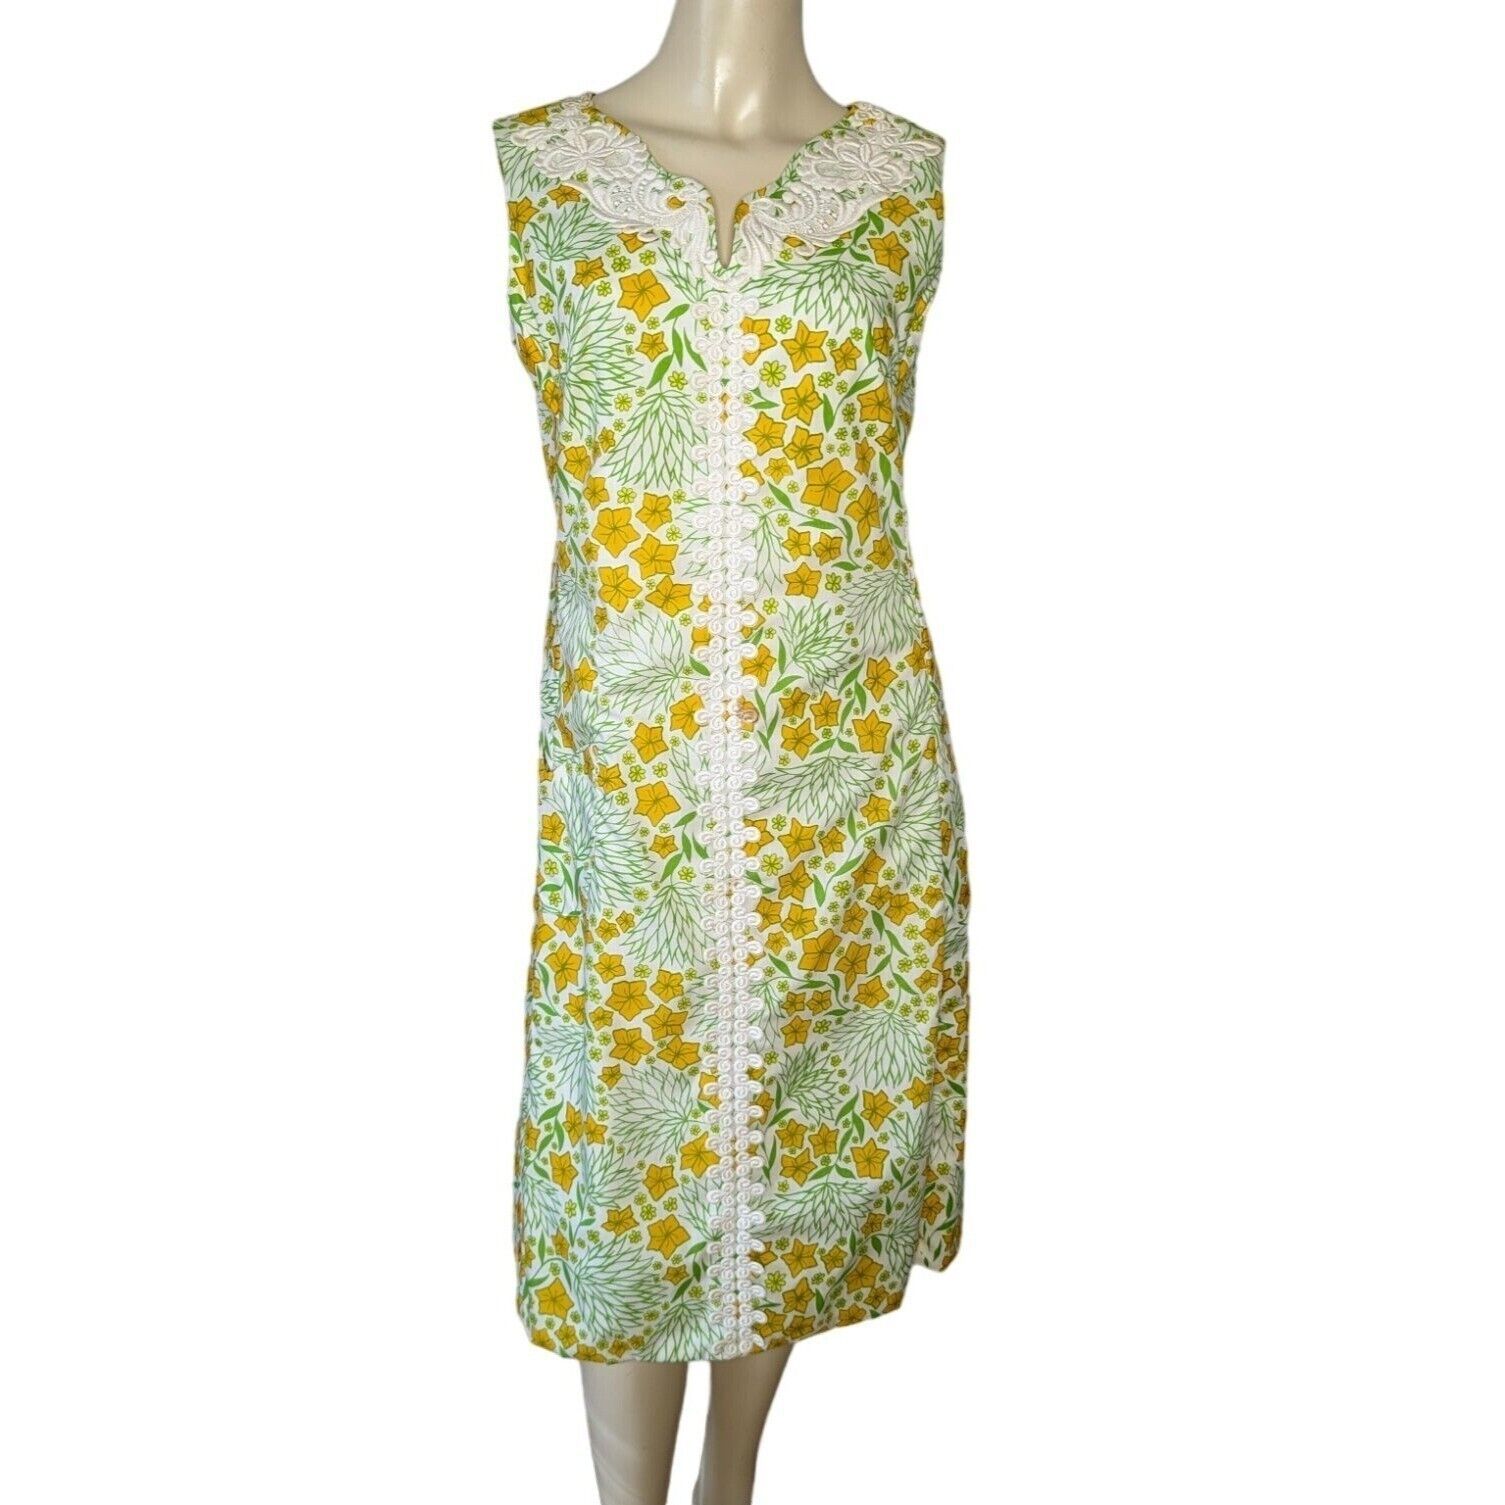 The Lilly LILLY PULITZER Vintage 1970s floral Summer yellow green lace dress 12  | eBay | eBay US